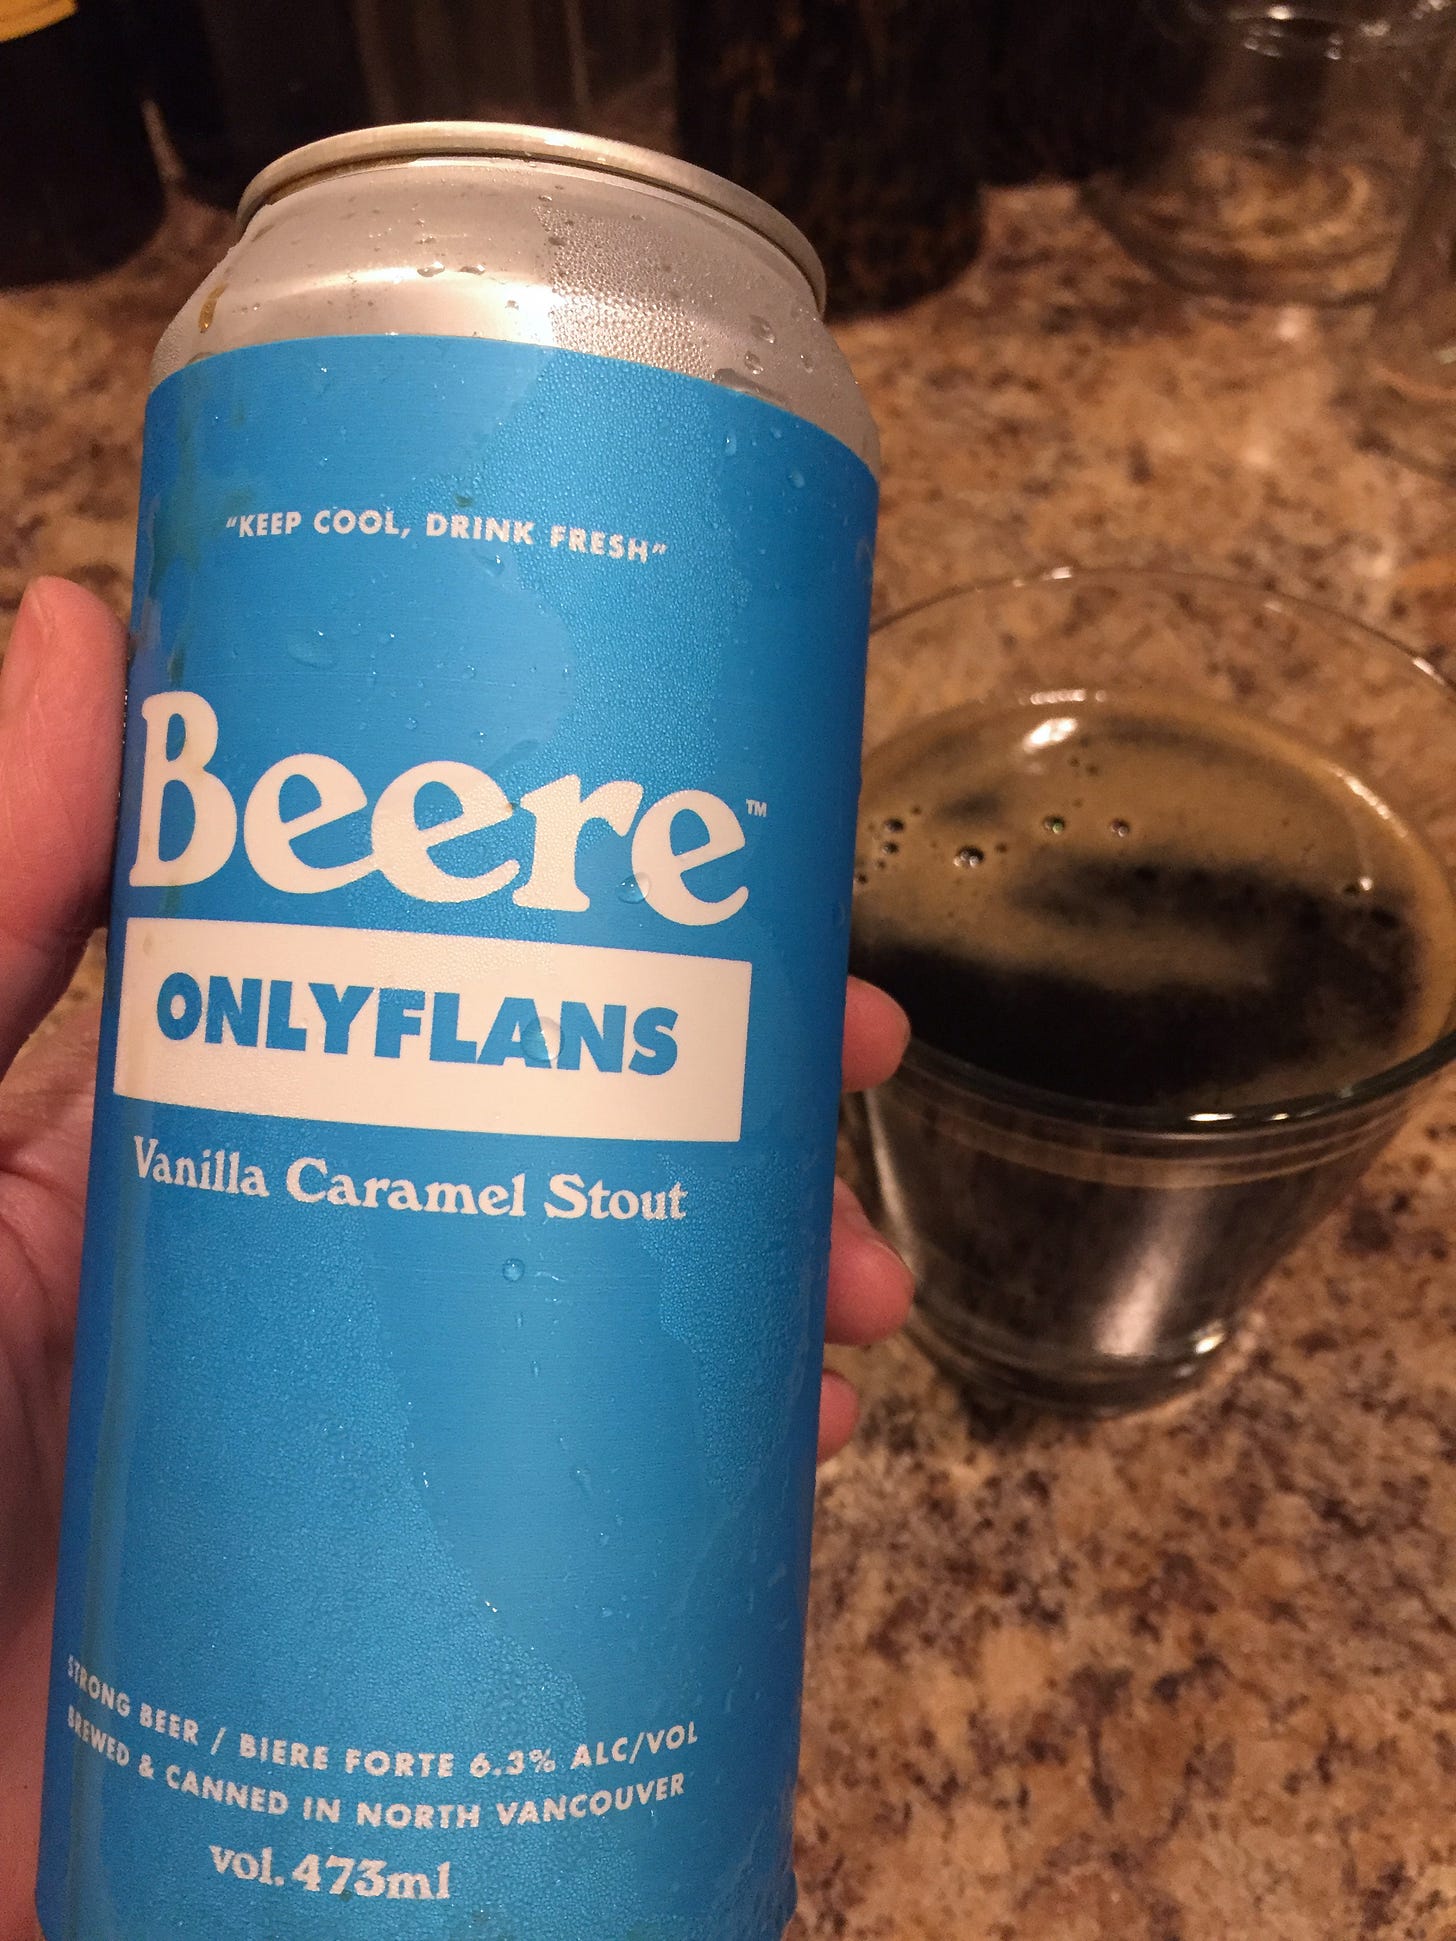 my hand holds up a blue-labelled beer can in the foreground, with a glass of dark beer in the background. The label reads, "Beere / onlyflans / vanilla caramel stout".